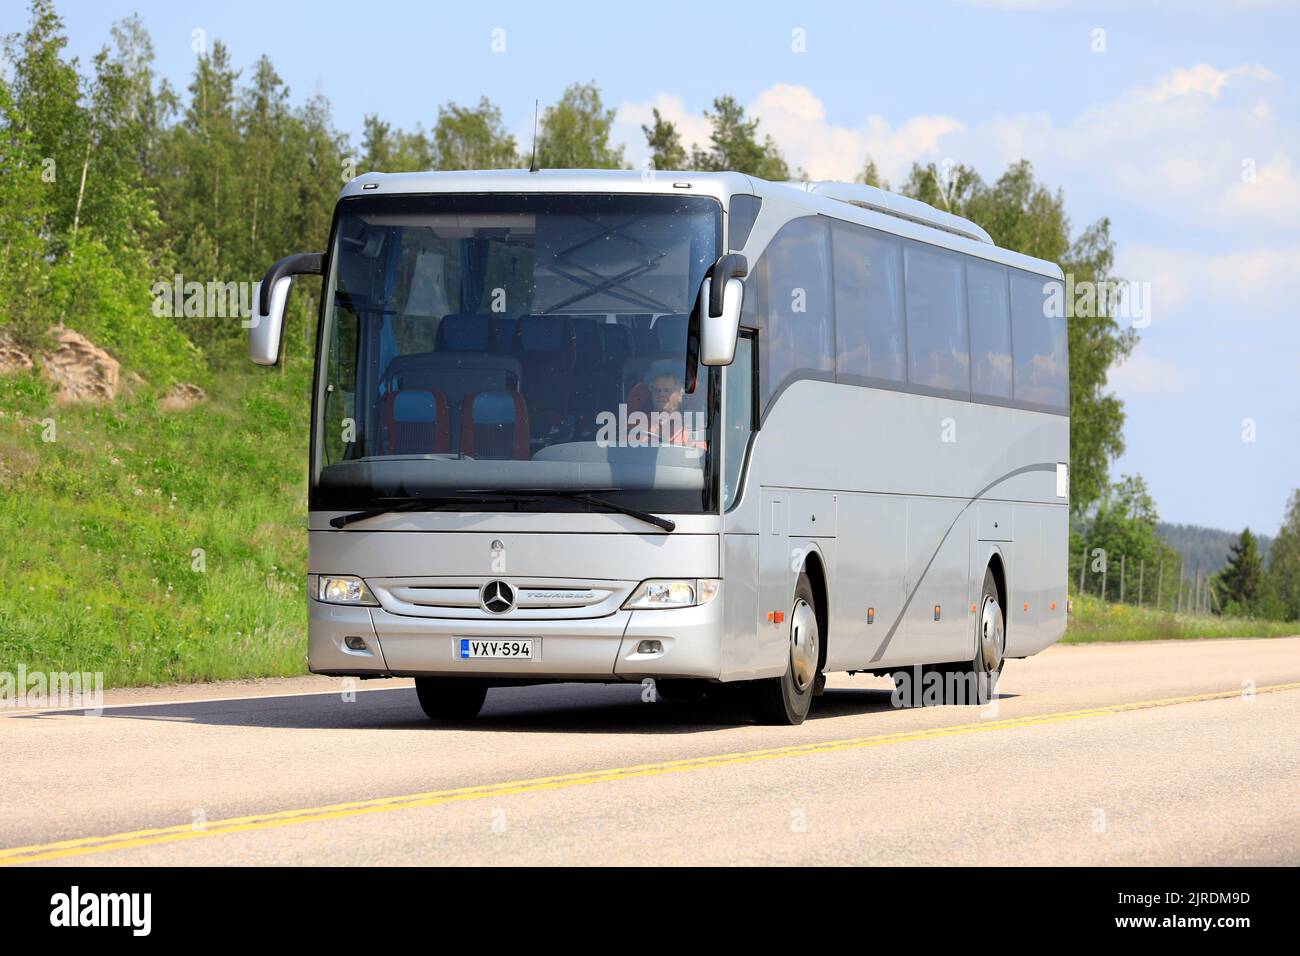 Silver Mercedes-Benz Turismo coach bus on road on a sunny day of summer. Orivesi, Finland. June 6, 2019. Stock Photo